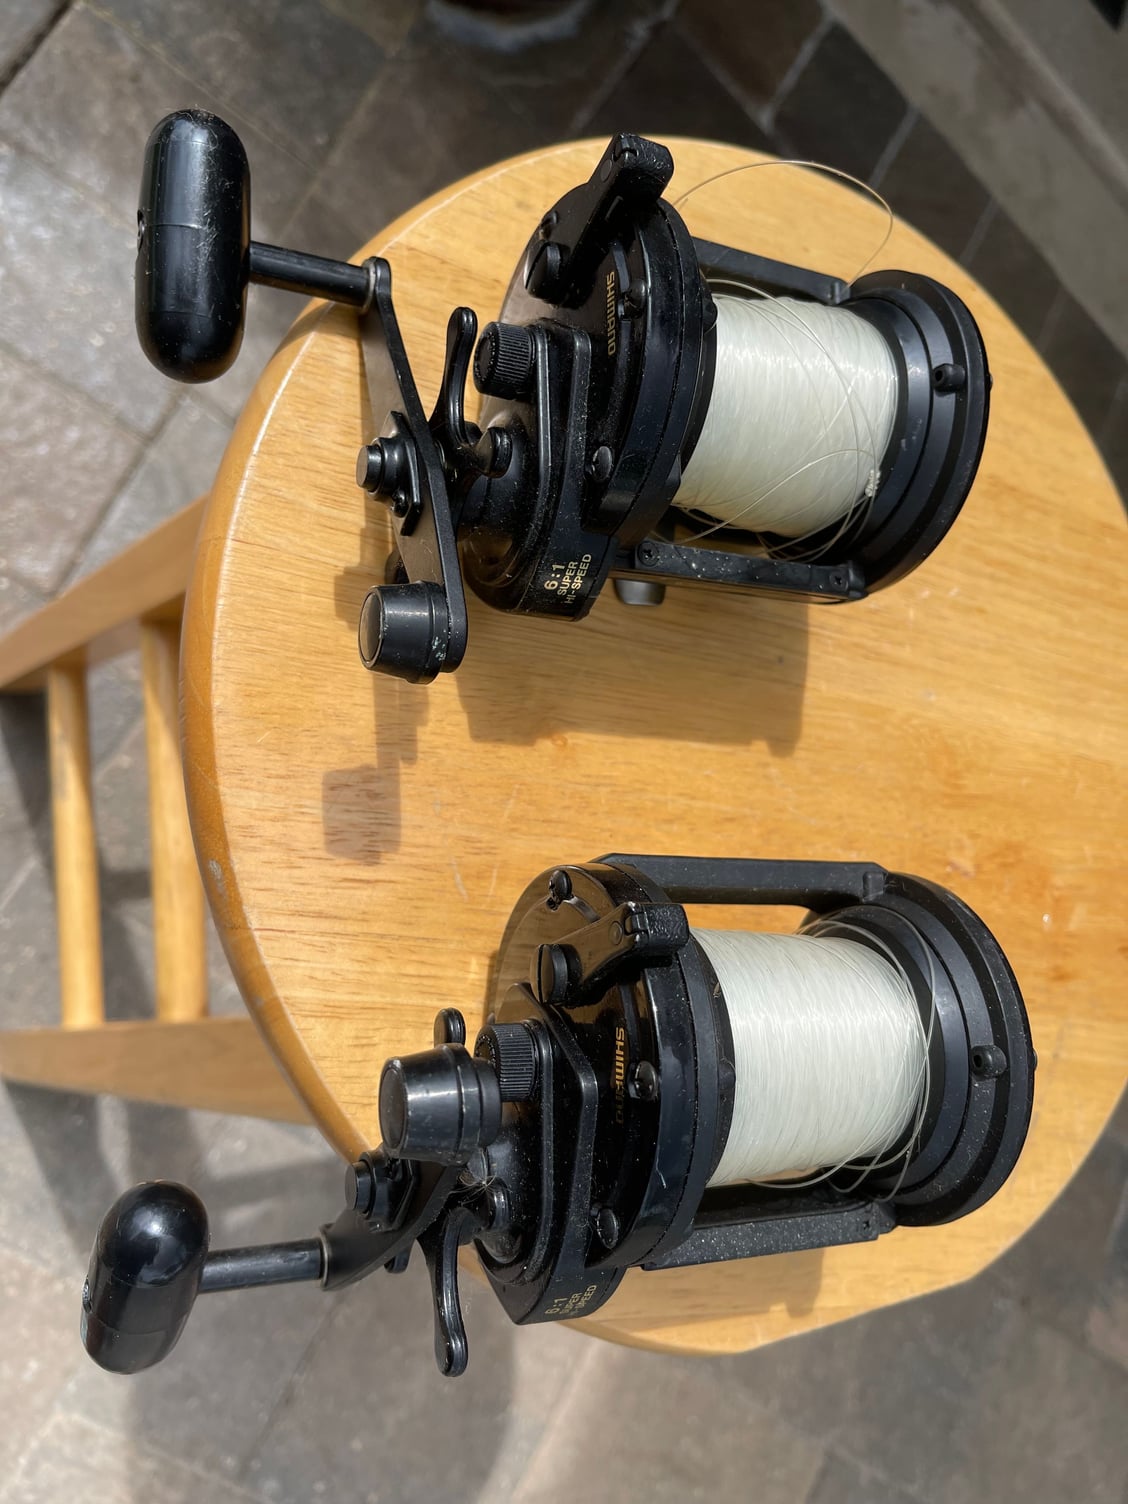 Shimano's New Speedmaster? - Page 5 - The Hull Truth - Boating and Fishing  Forum